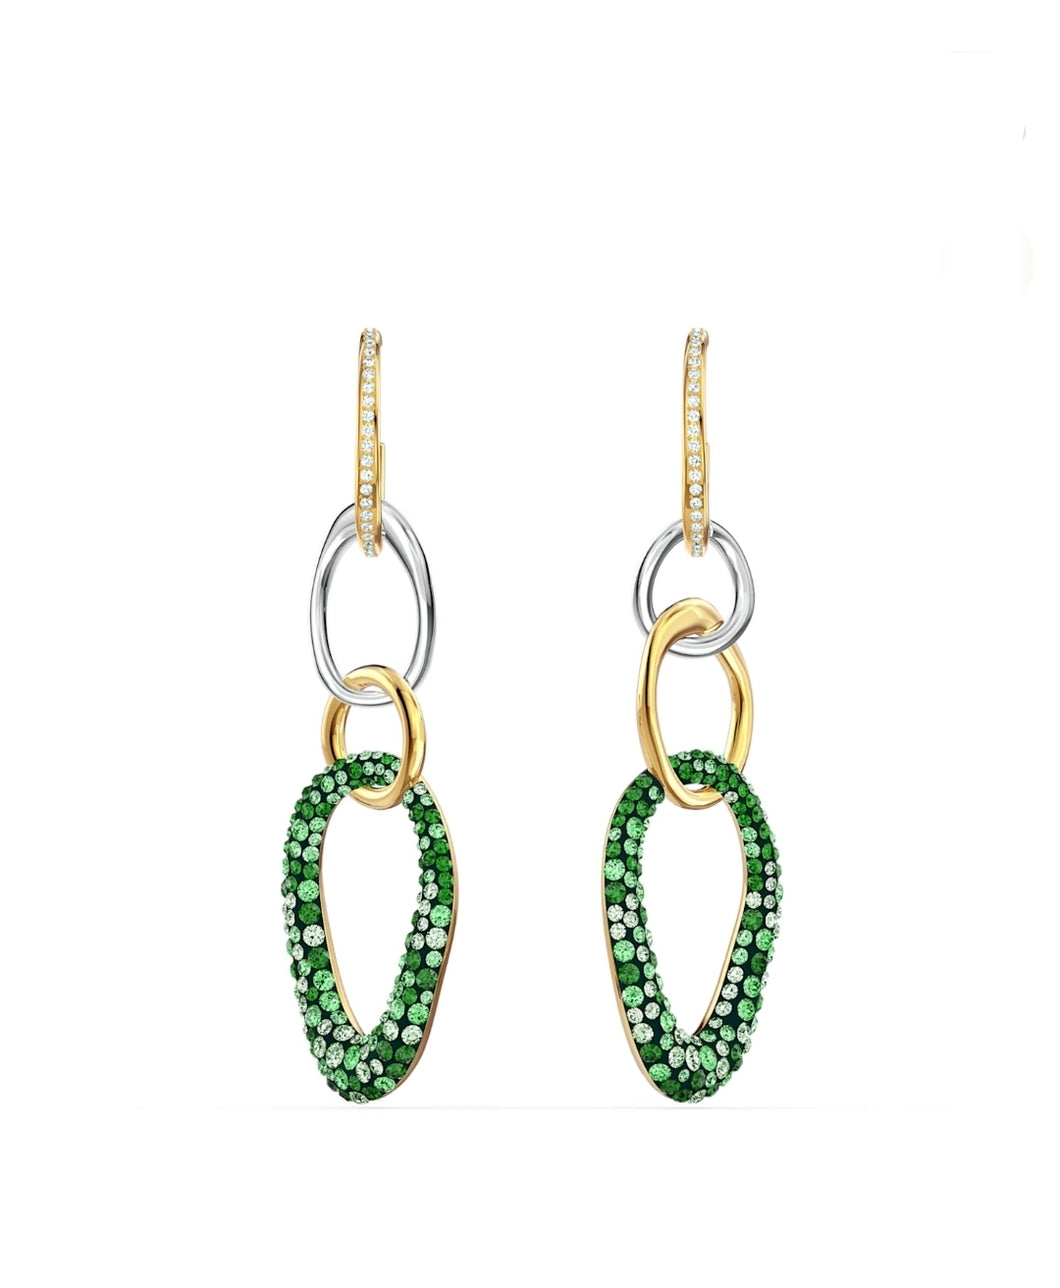 A celebration of femininity and modern design, this pair of pierced earrings by Swarovski draws inspiration from the element of Earth for a striking and brilliant must-have with a modern, asymmetric look.